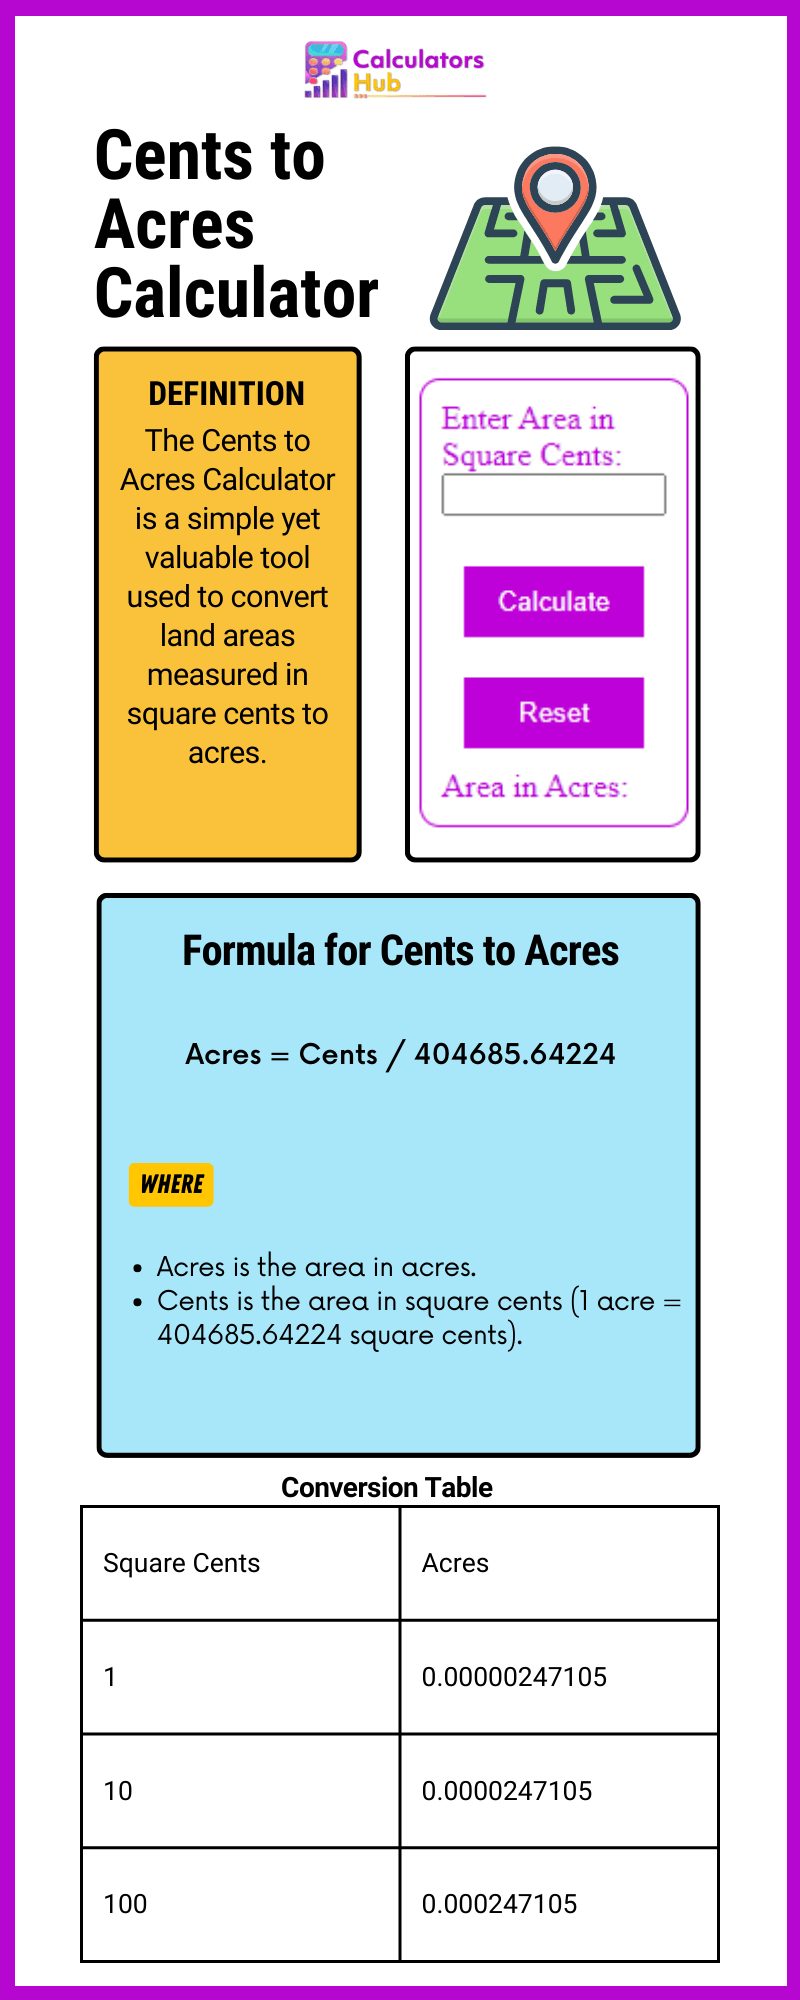 Cents to Acres Calculator